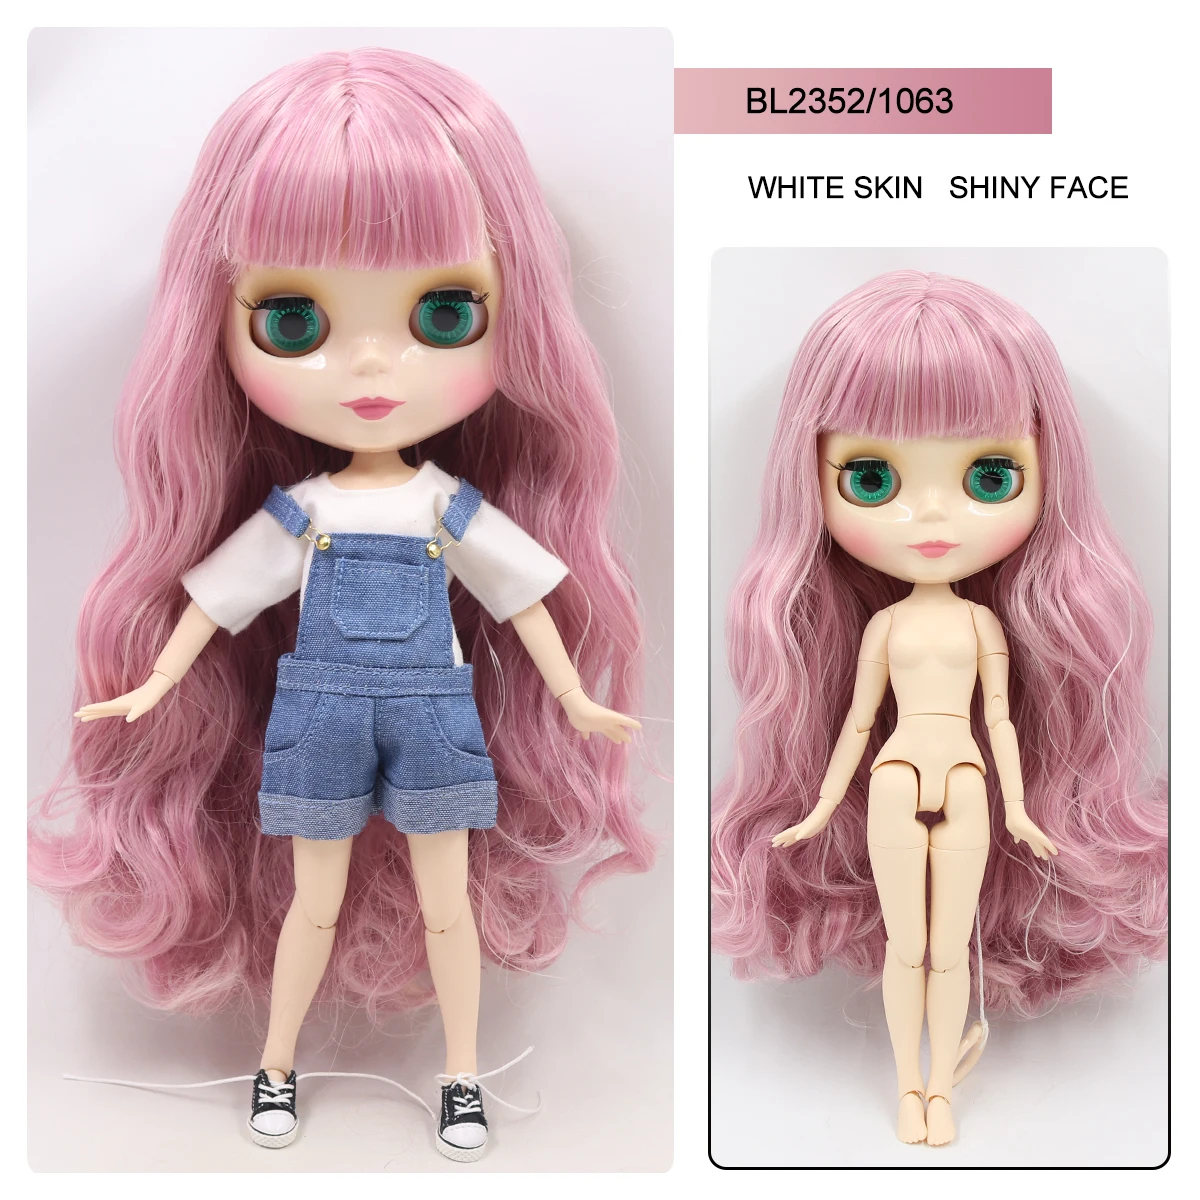 Neo Blythe Doll with Pink Hair, White Skin, Shiny Face & Factory Jointed Body 2